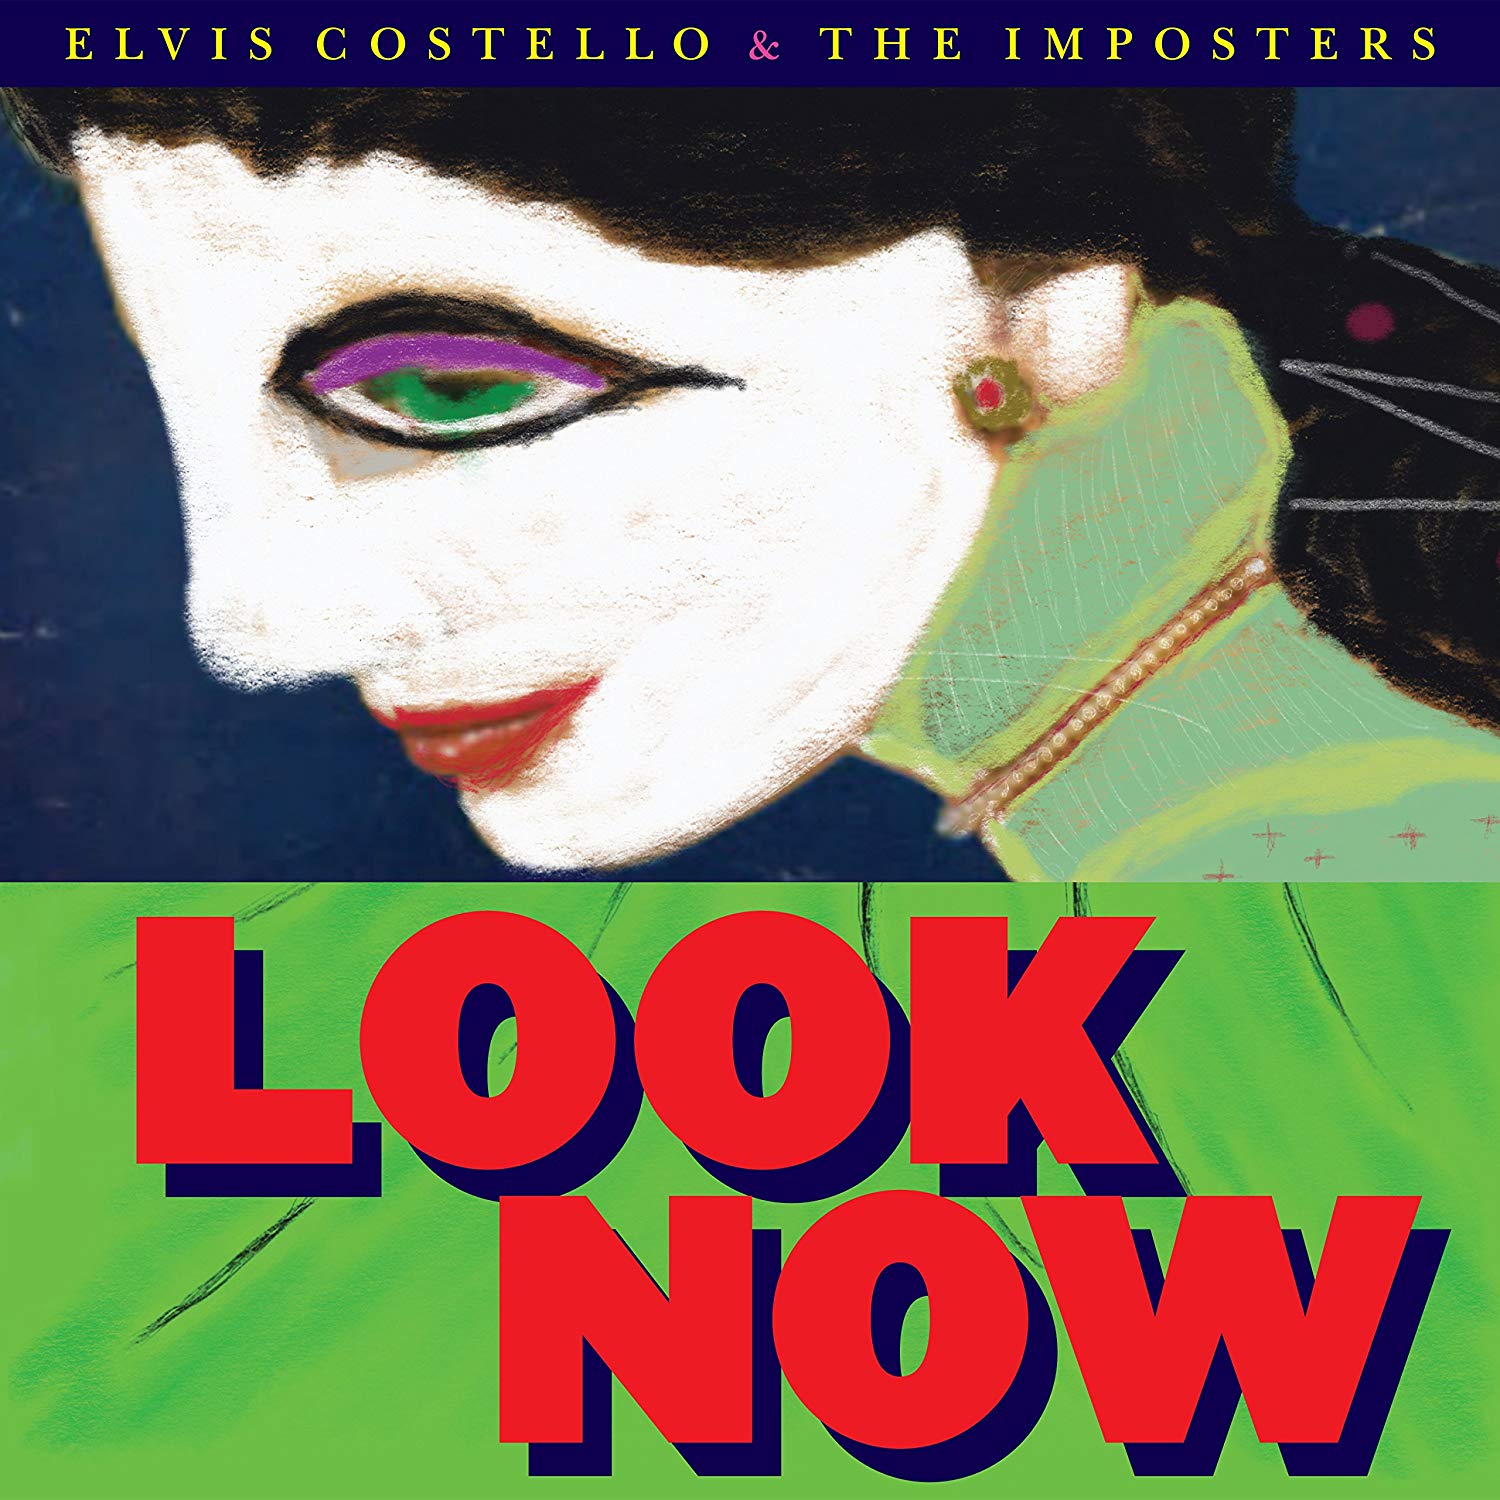 ELVIS COSTELLO & THE IMPOSTERS / エルヴィス・コステロ&ジ・インポスターズ / LOOK NOW (180G LP)